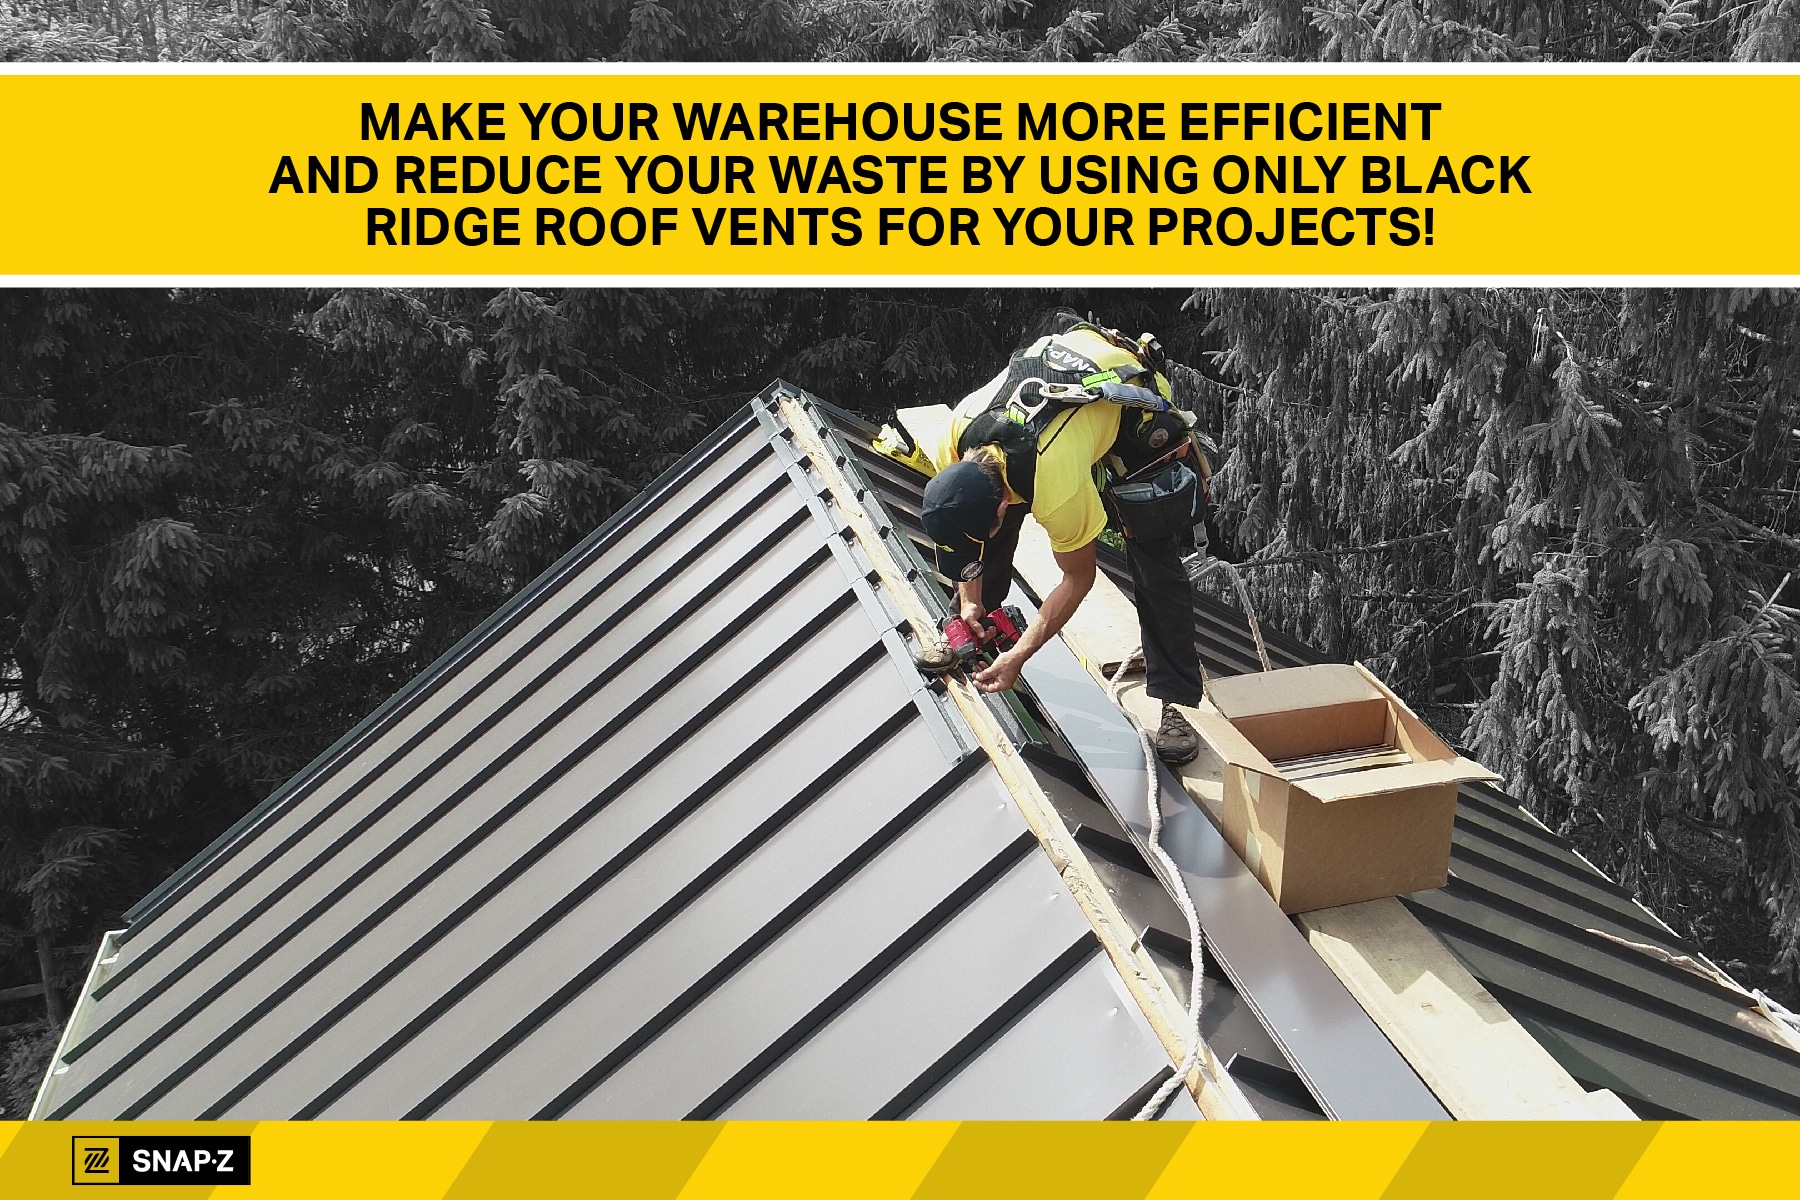 Become more efficient by stocking just one color of ridge vent